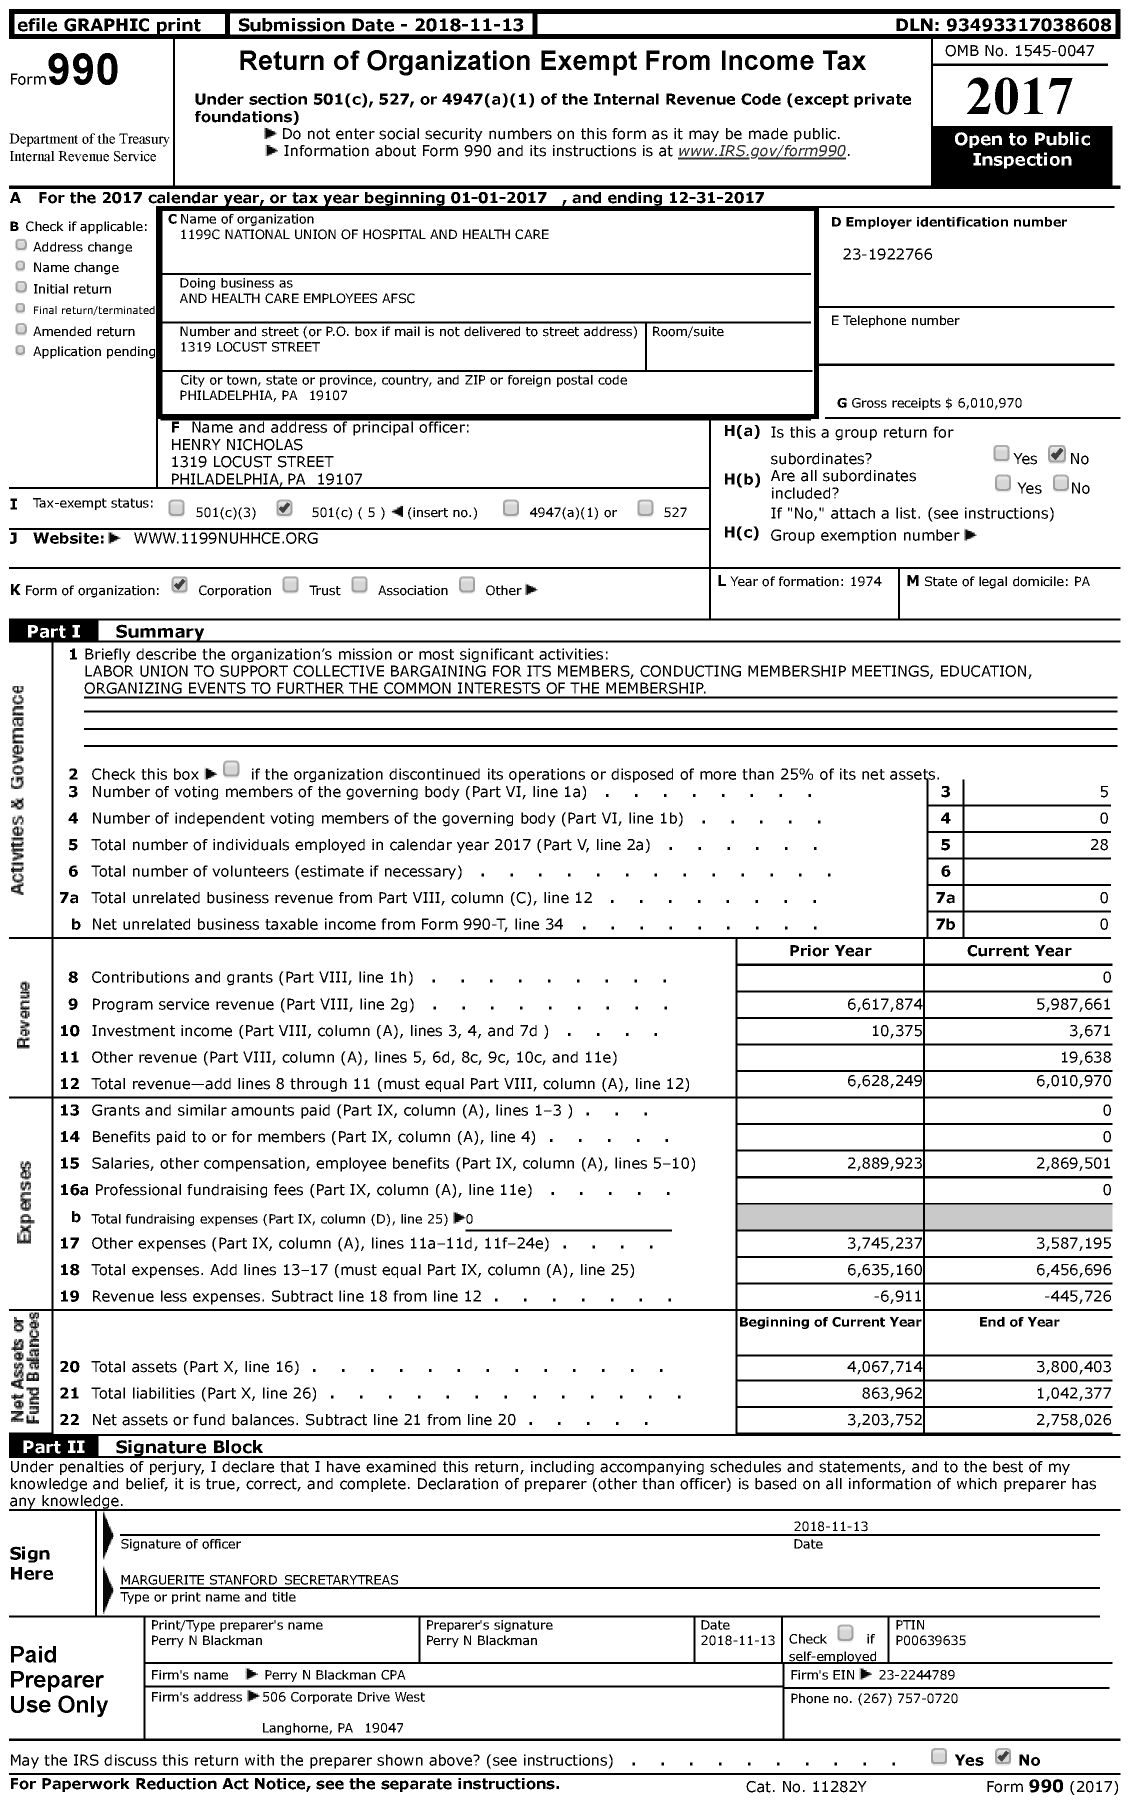 Image of first page of 2017 Form 990 for American Federation of State County & Municipal Employees - And Health Care Employees Afsc